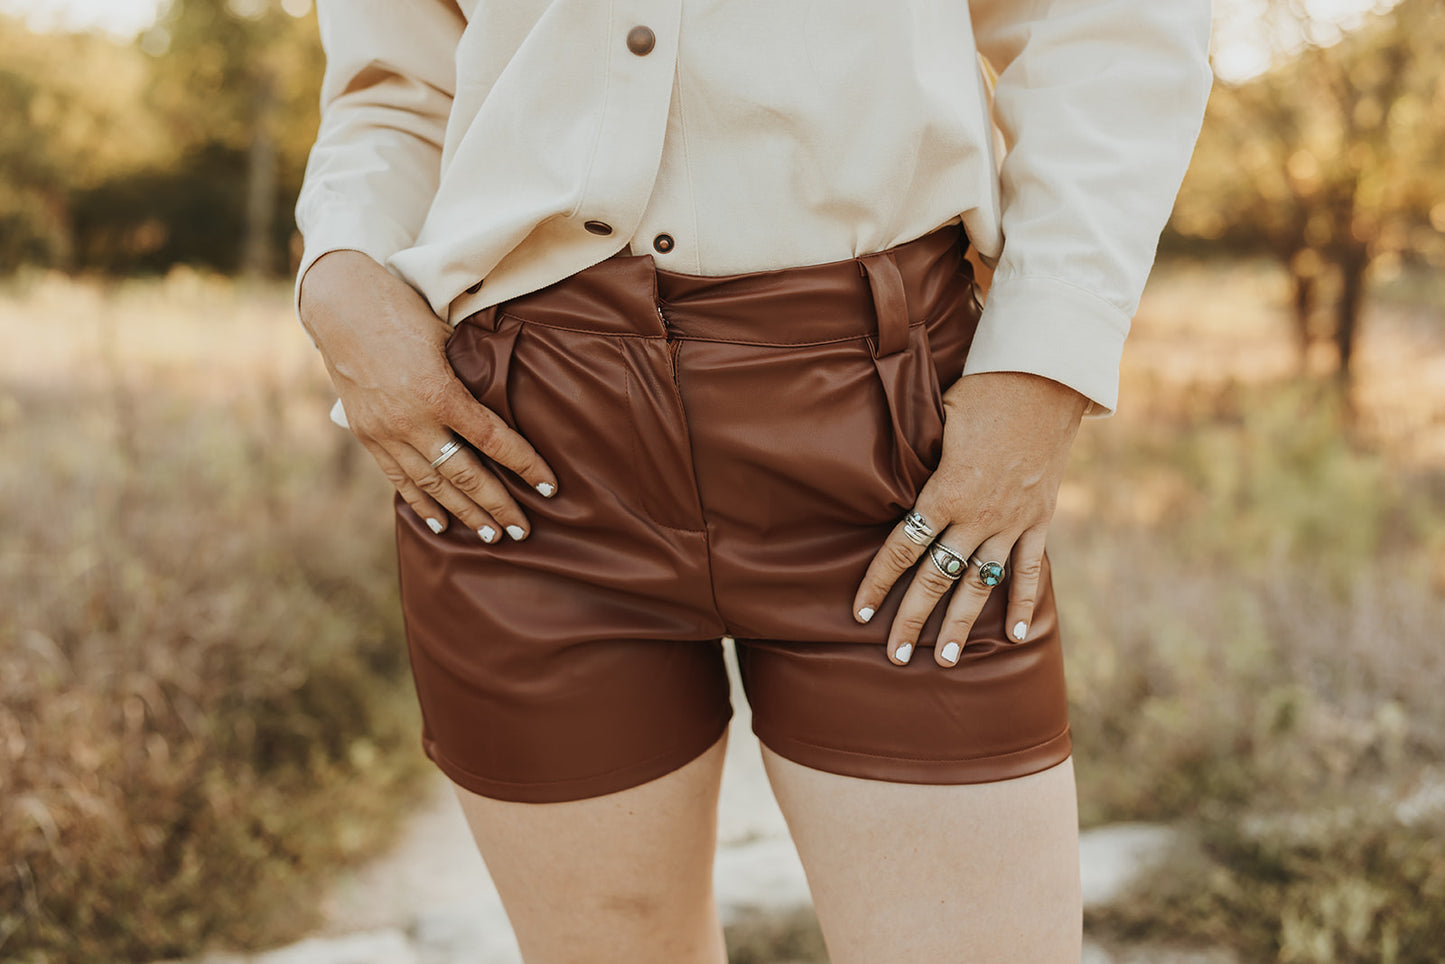 The Renner Leather Shorts